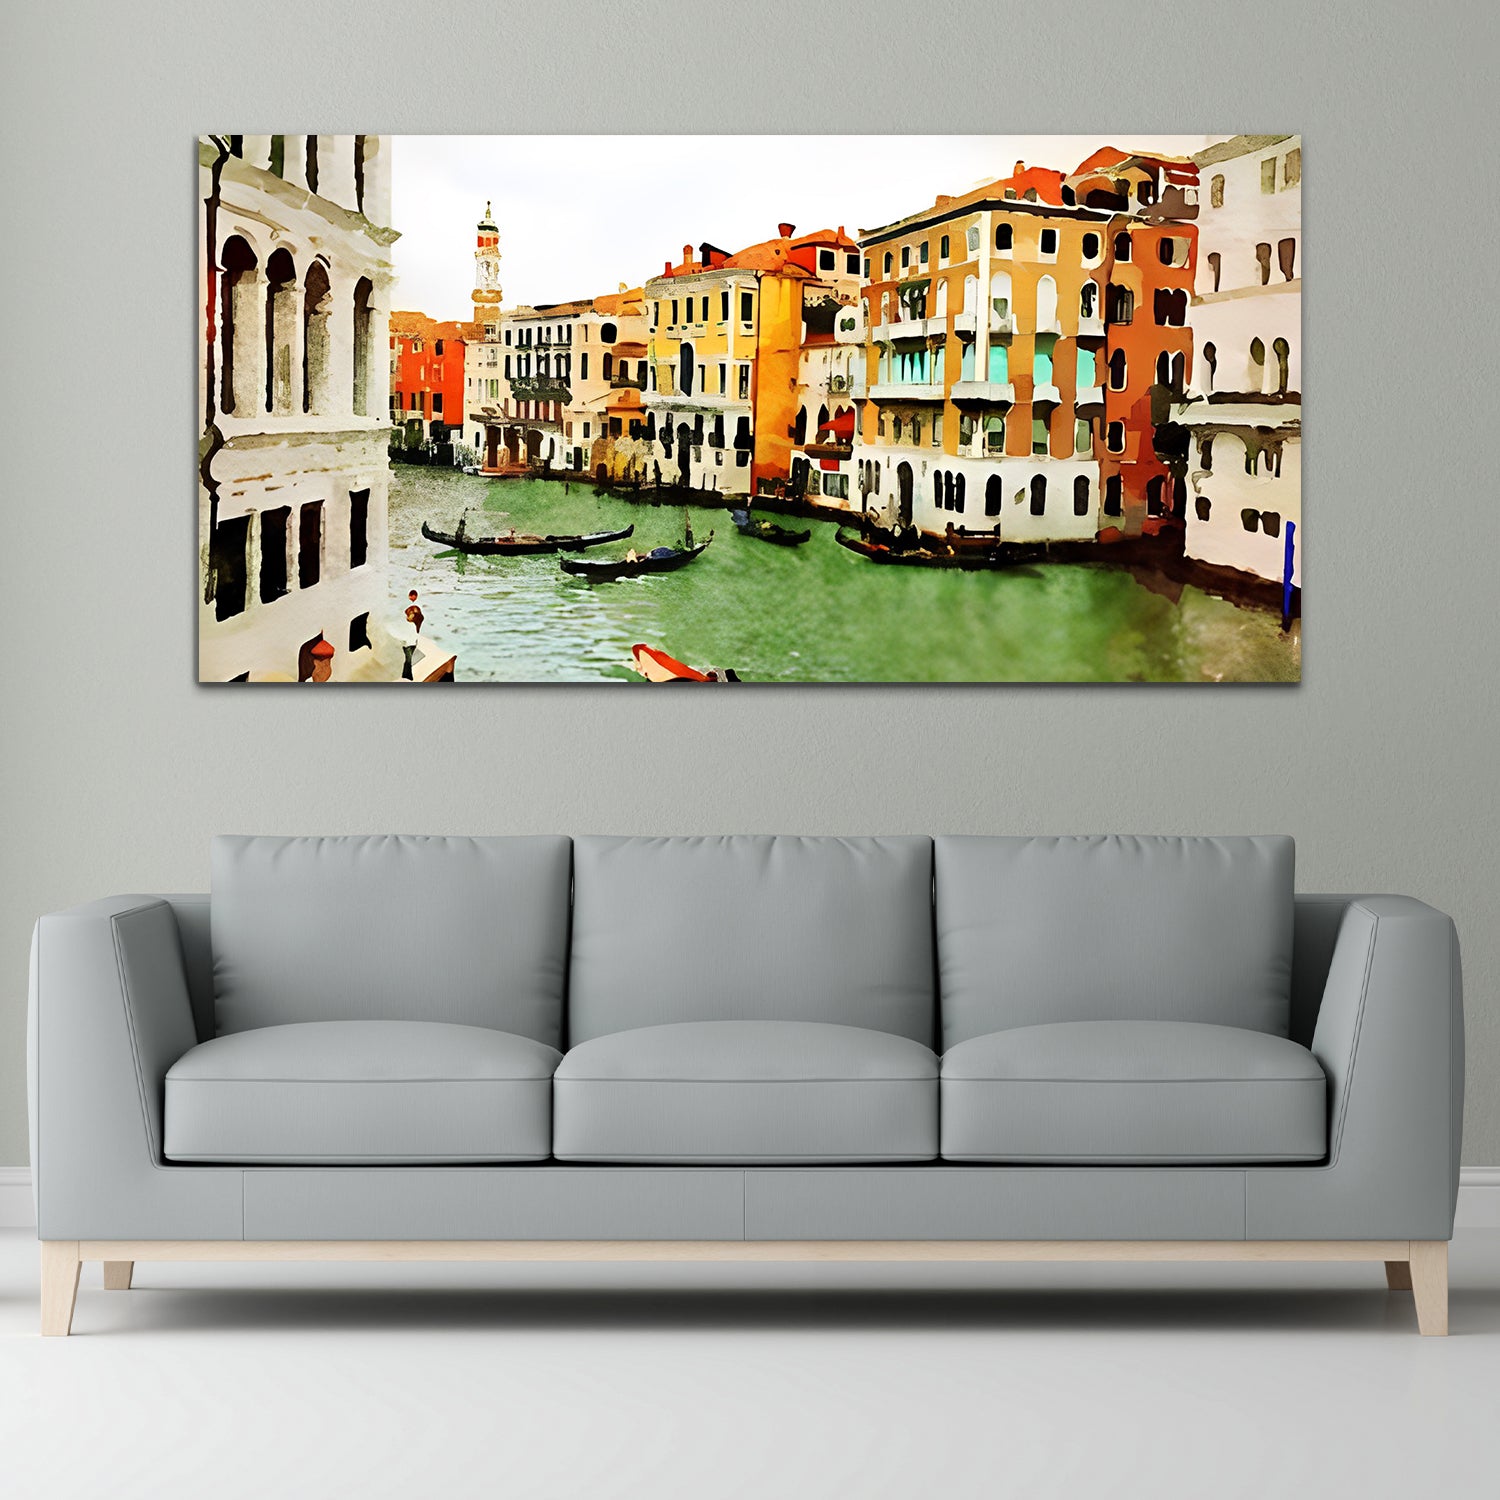 Light Effect Canvas Wall Painting